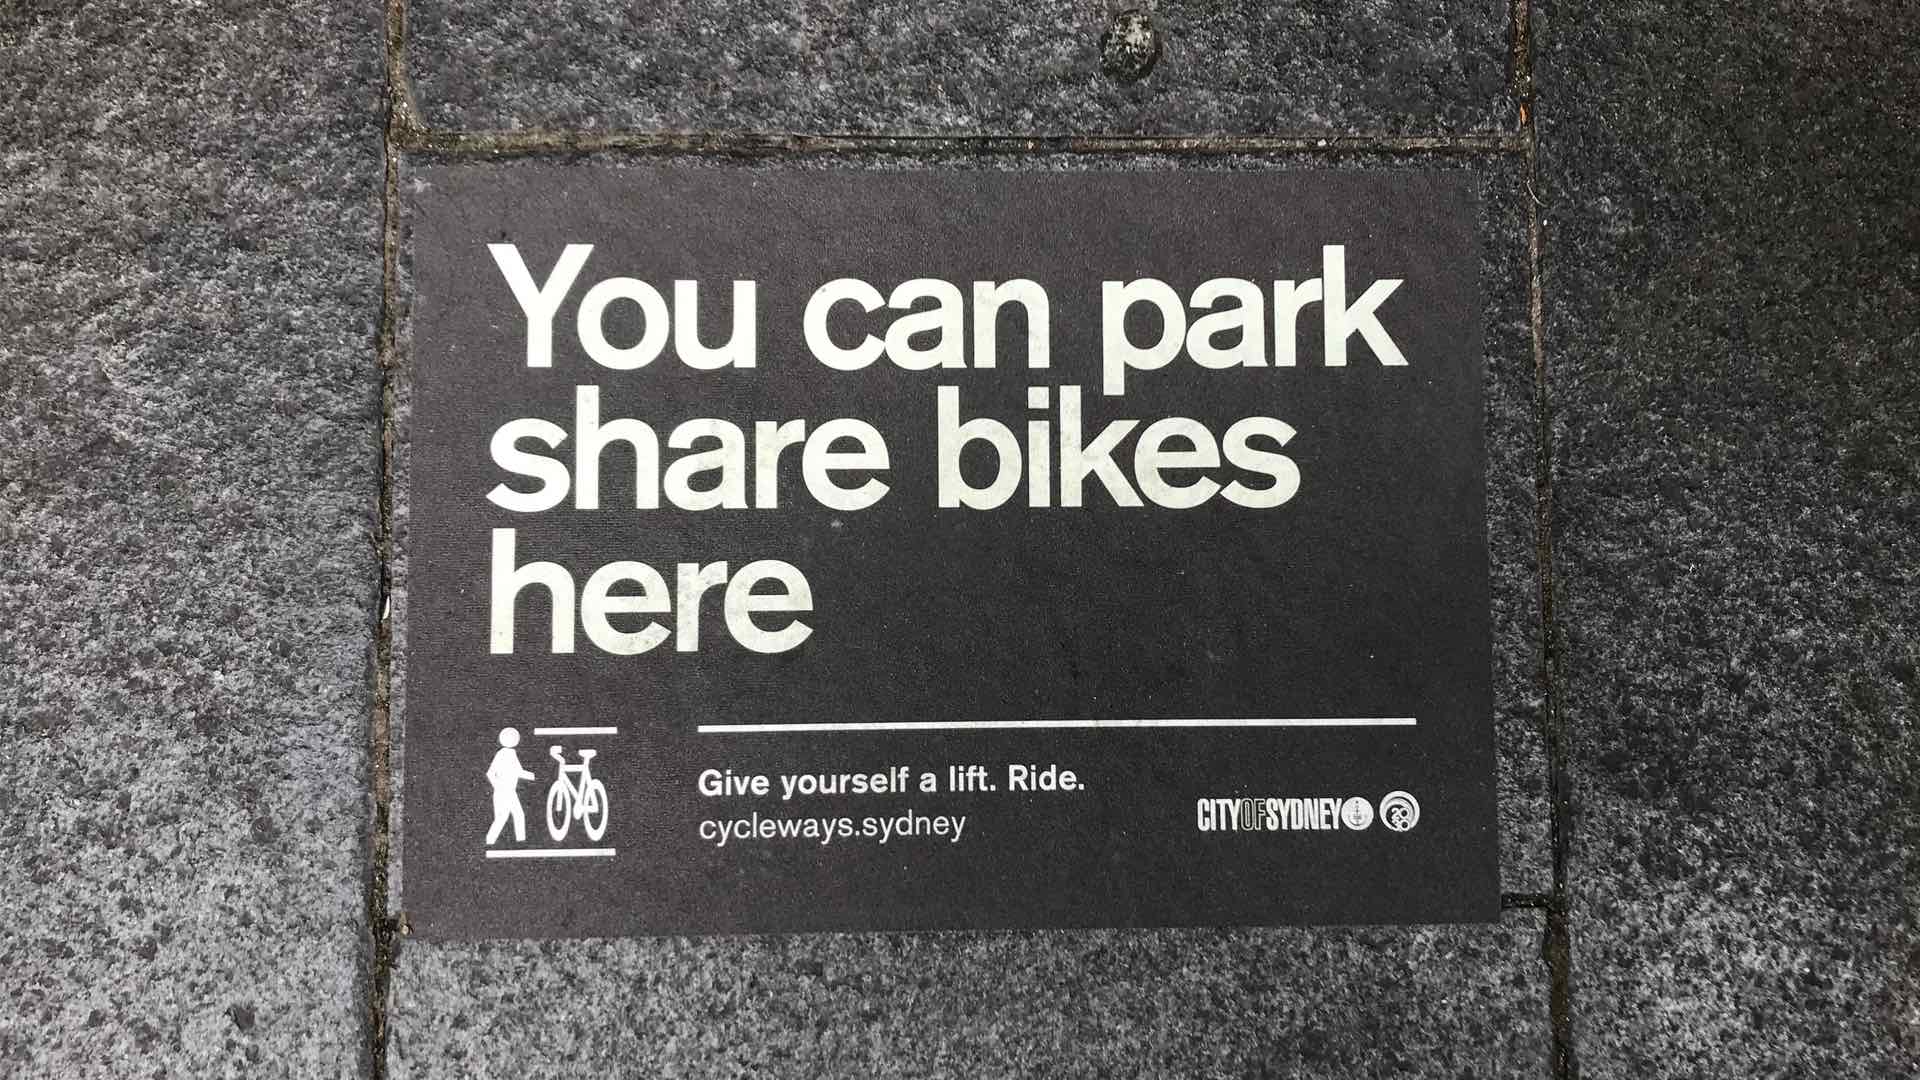 Bike Sharing Parking Bays Are Coming to Sydney's CBD